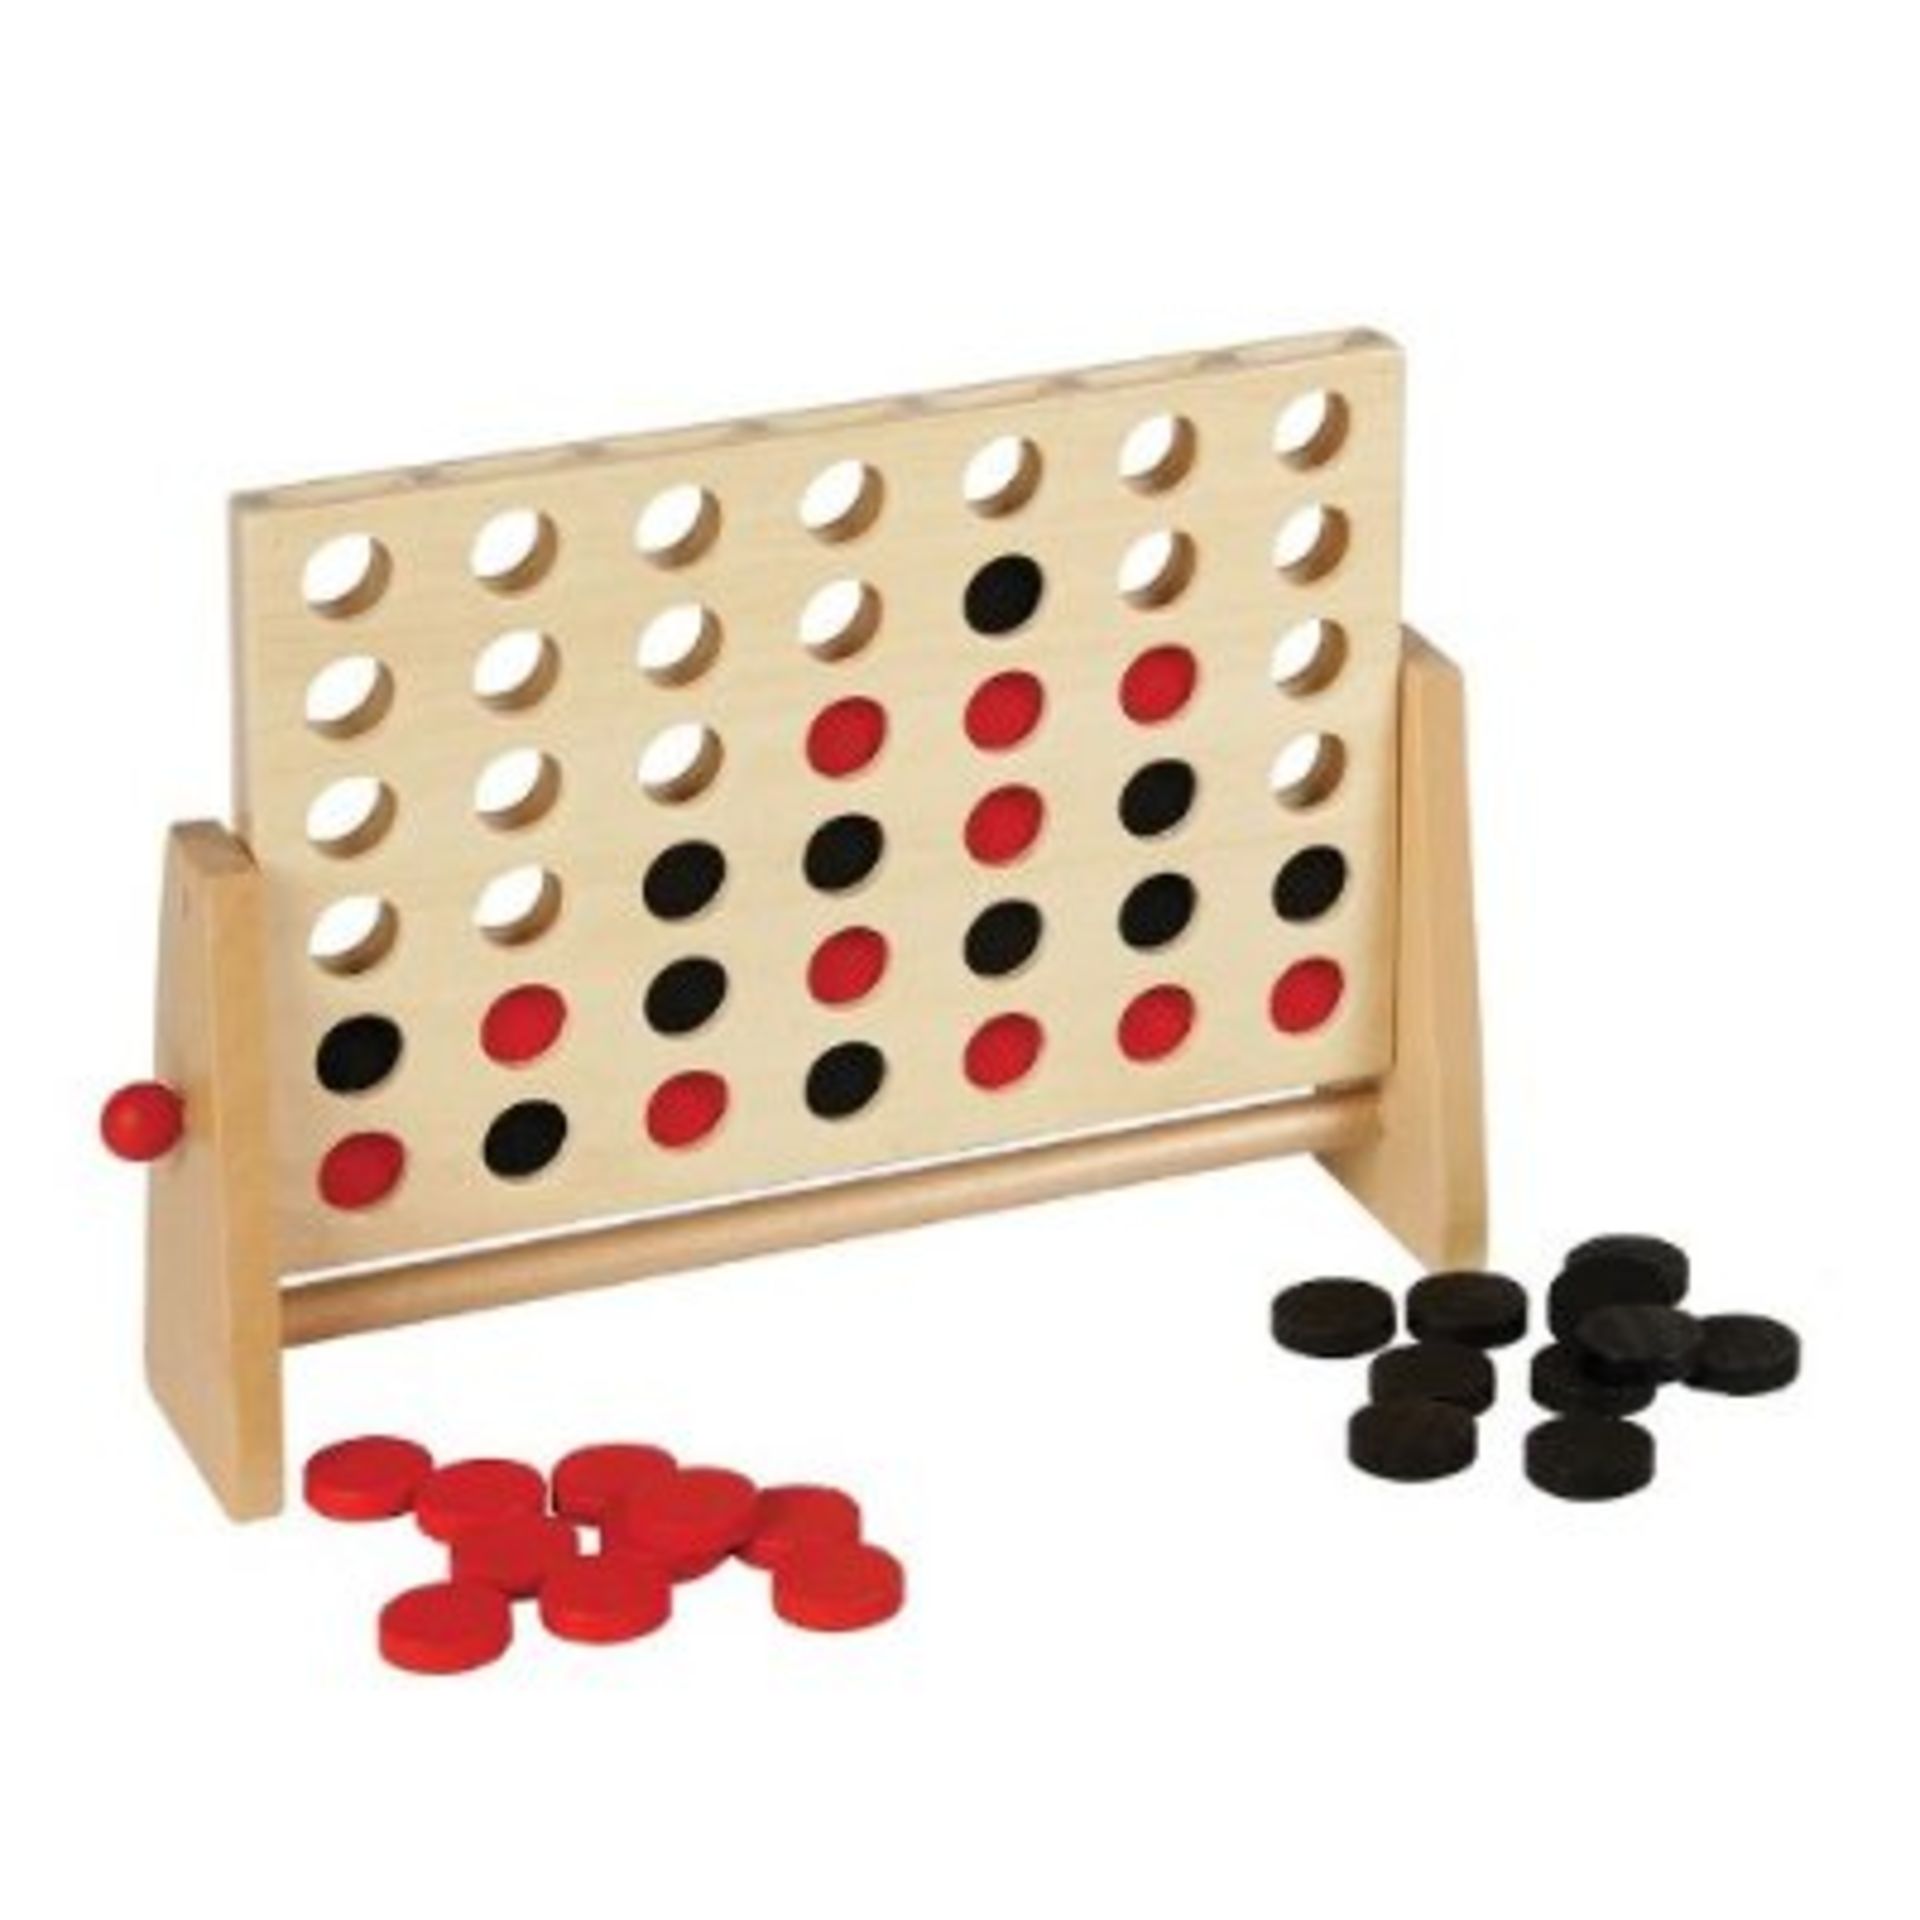 V Wooden Connect Four in a row game on swivel stand